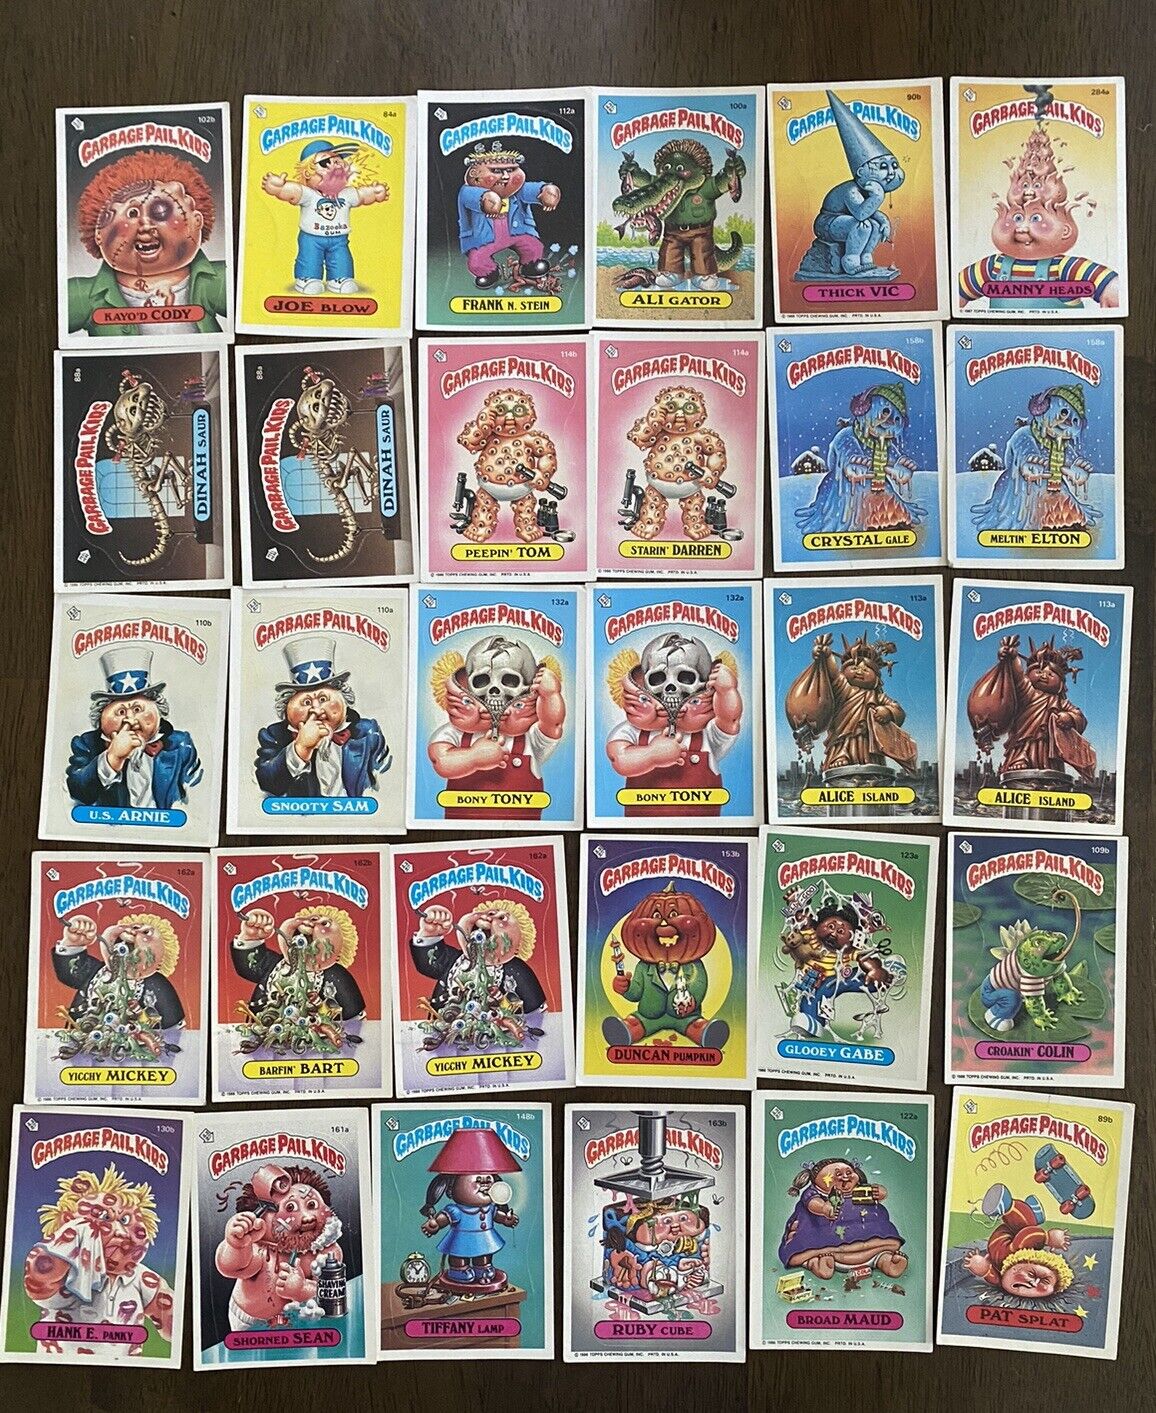 Vintage Garbage Pail Kids 30 Card Lot Boney Tony And More NM-VG Condition.